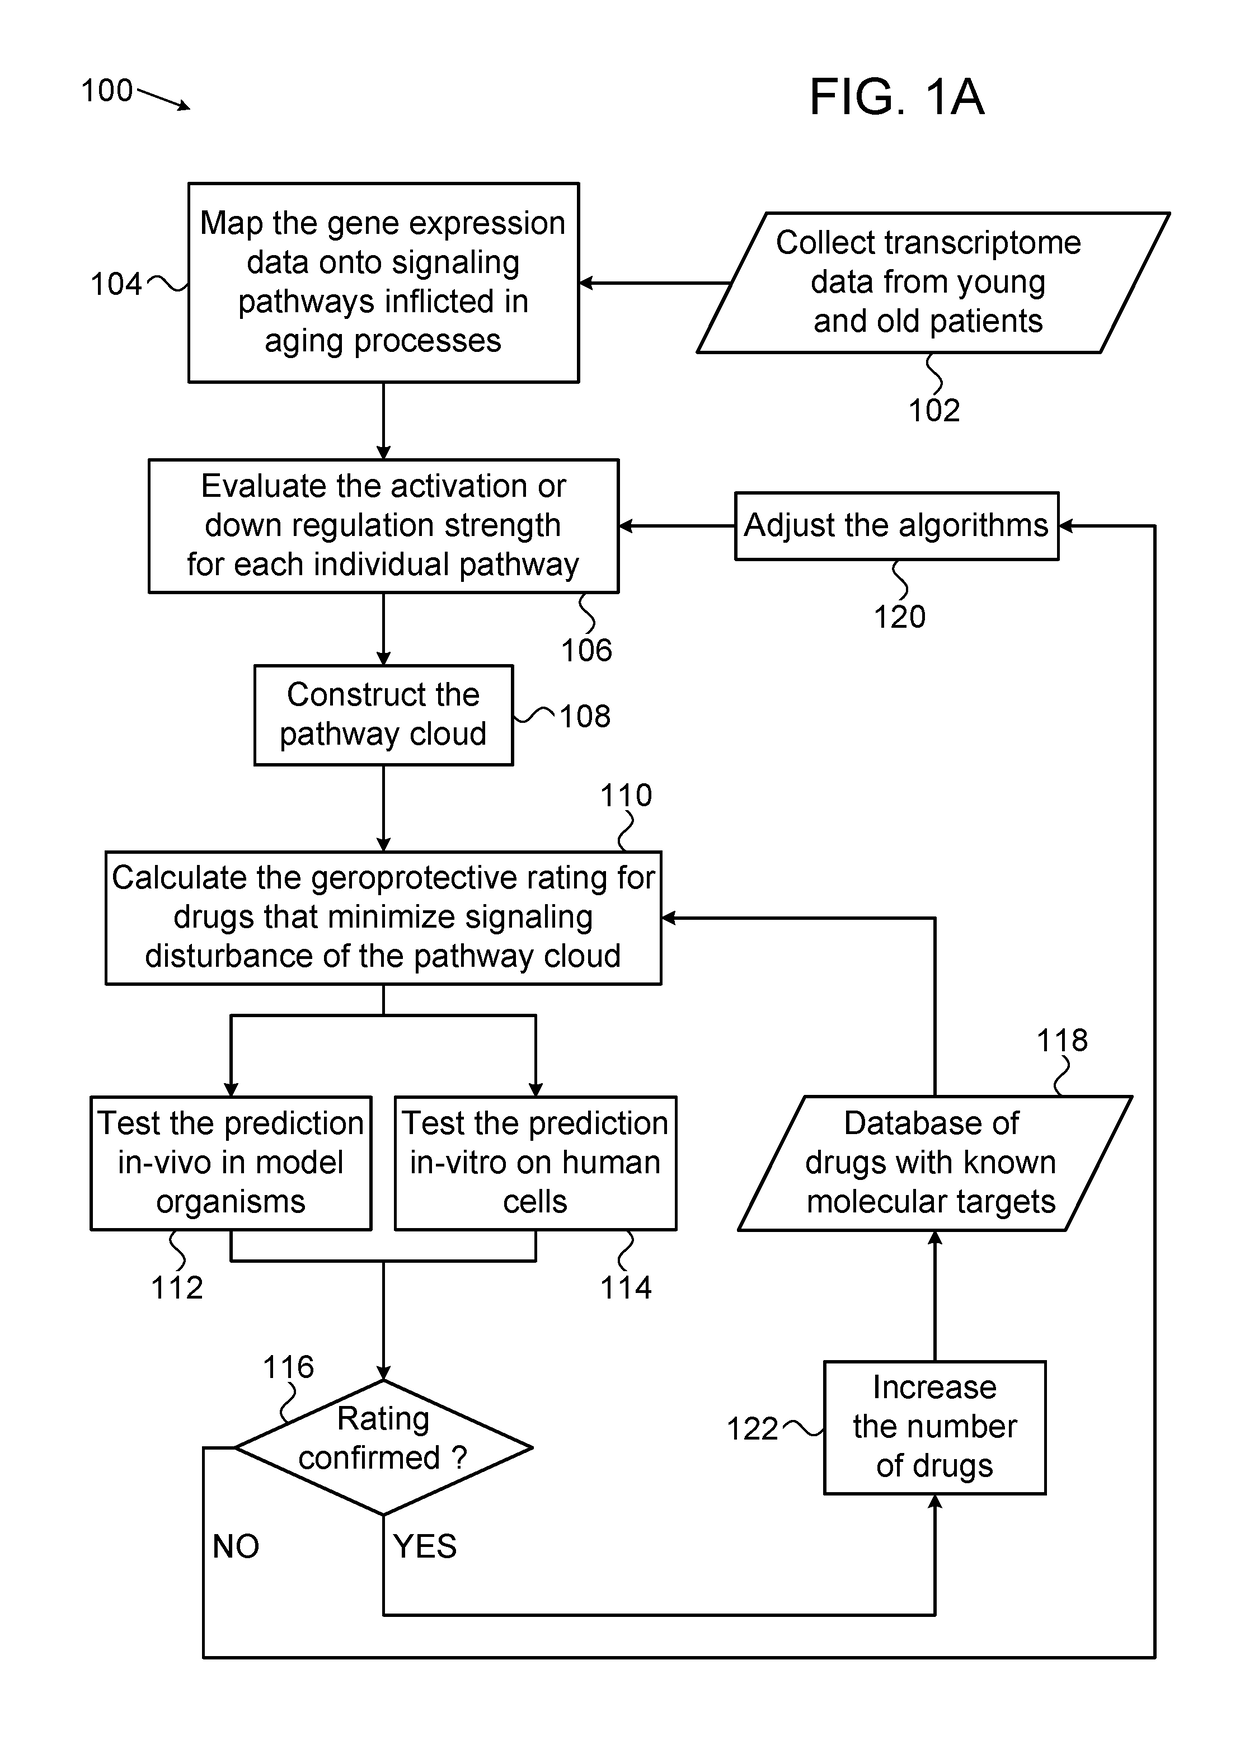 Systems, methods and software for ranking potential geroprotective drugs